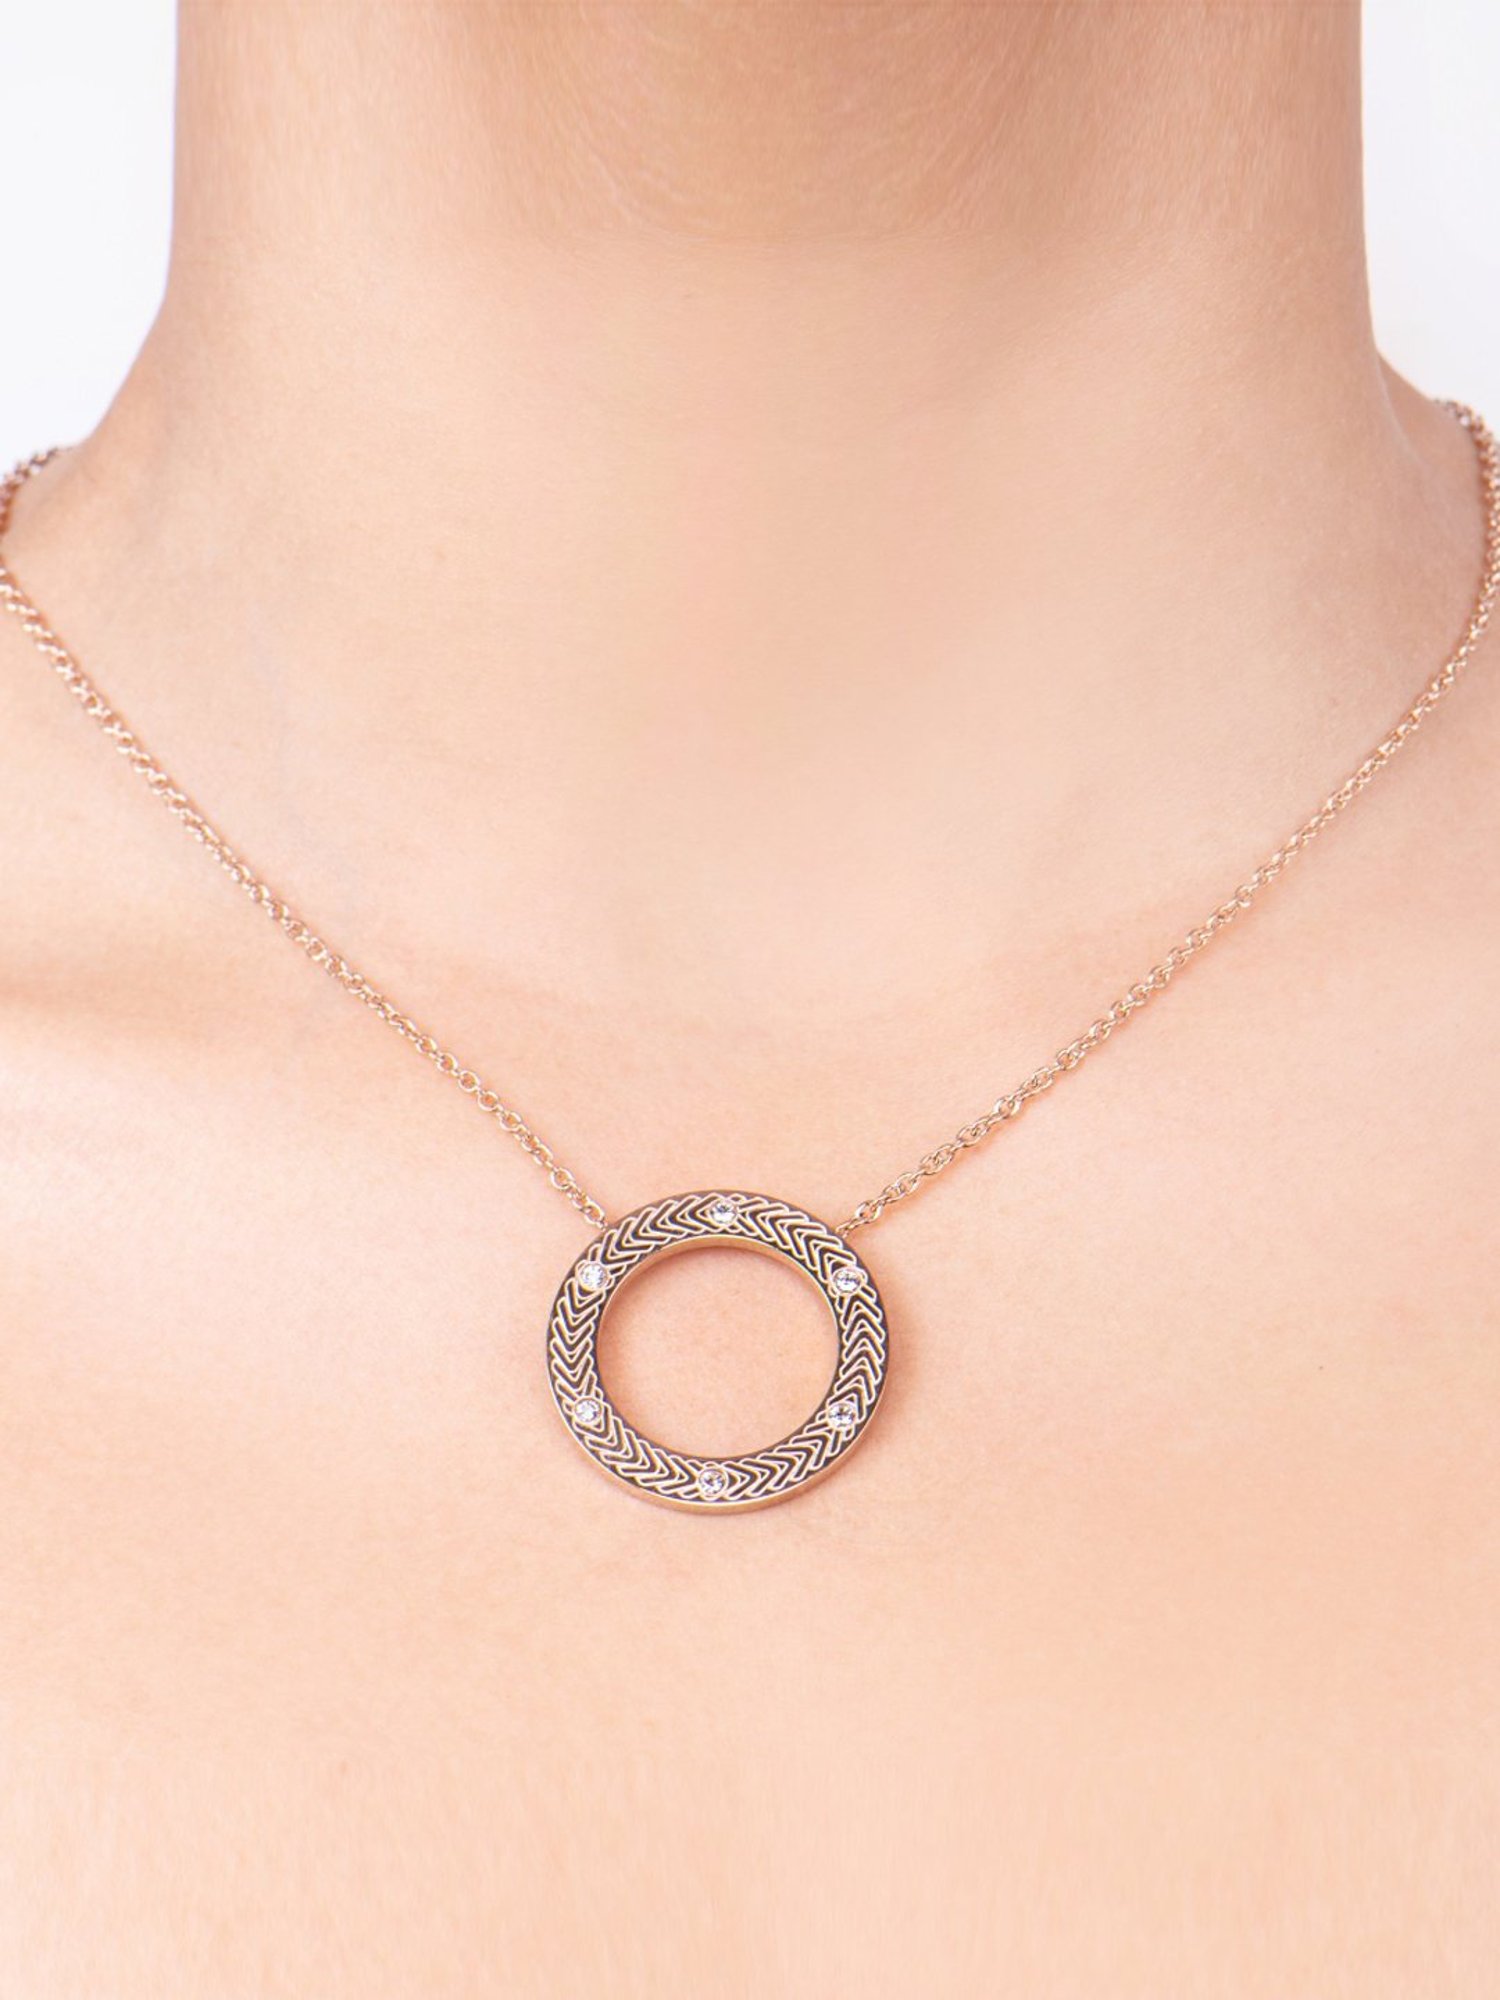 Intertwined Diamond Double Circle Necklace in 18K Rose Gold (0.67ct)